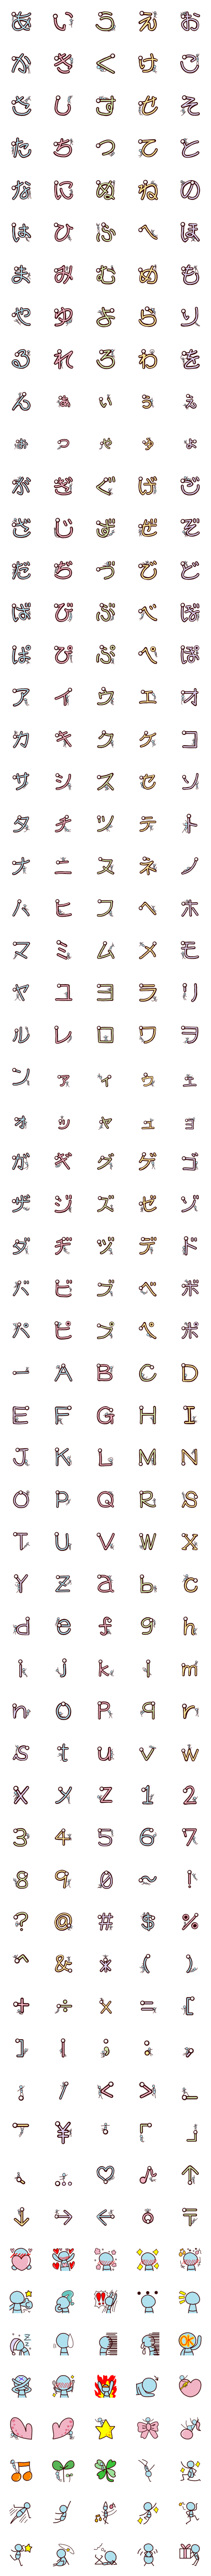 [LINE絵文字]ポケットヒューマンと絵文字の画像一覧